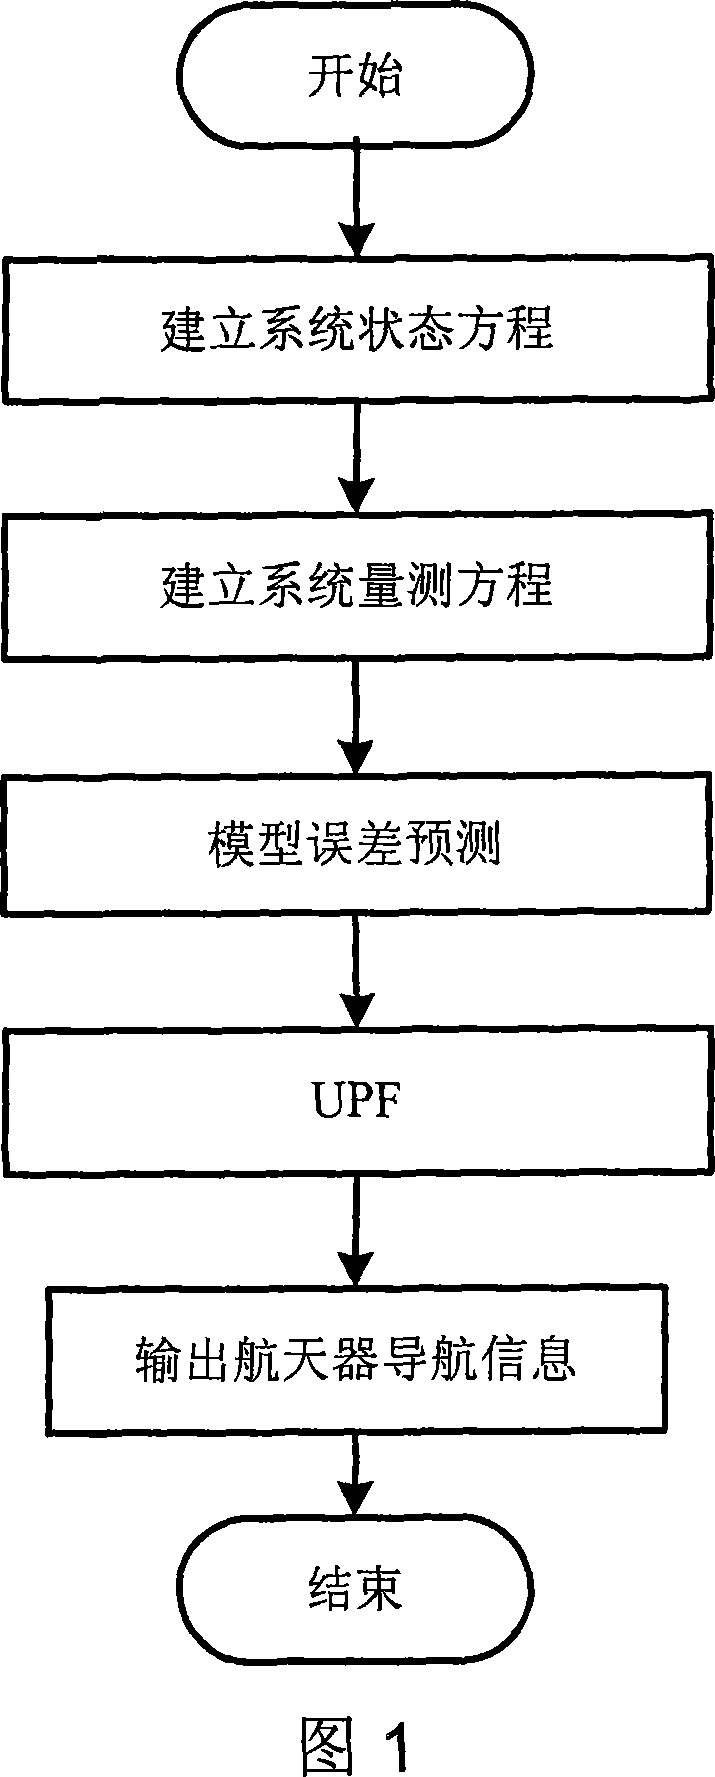 Self boundary marking method based on forecast filtering and UPF spacecraft shading device